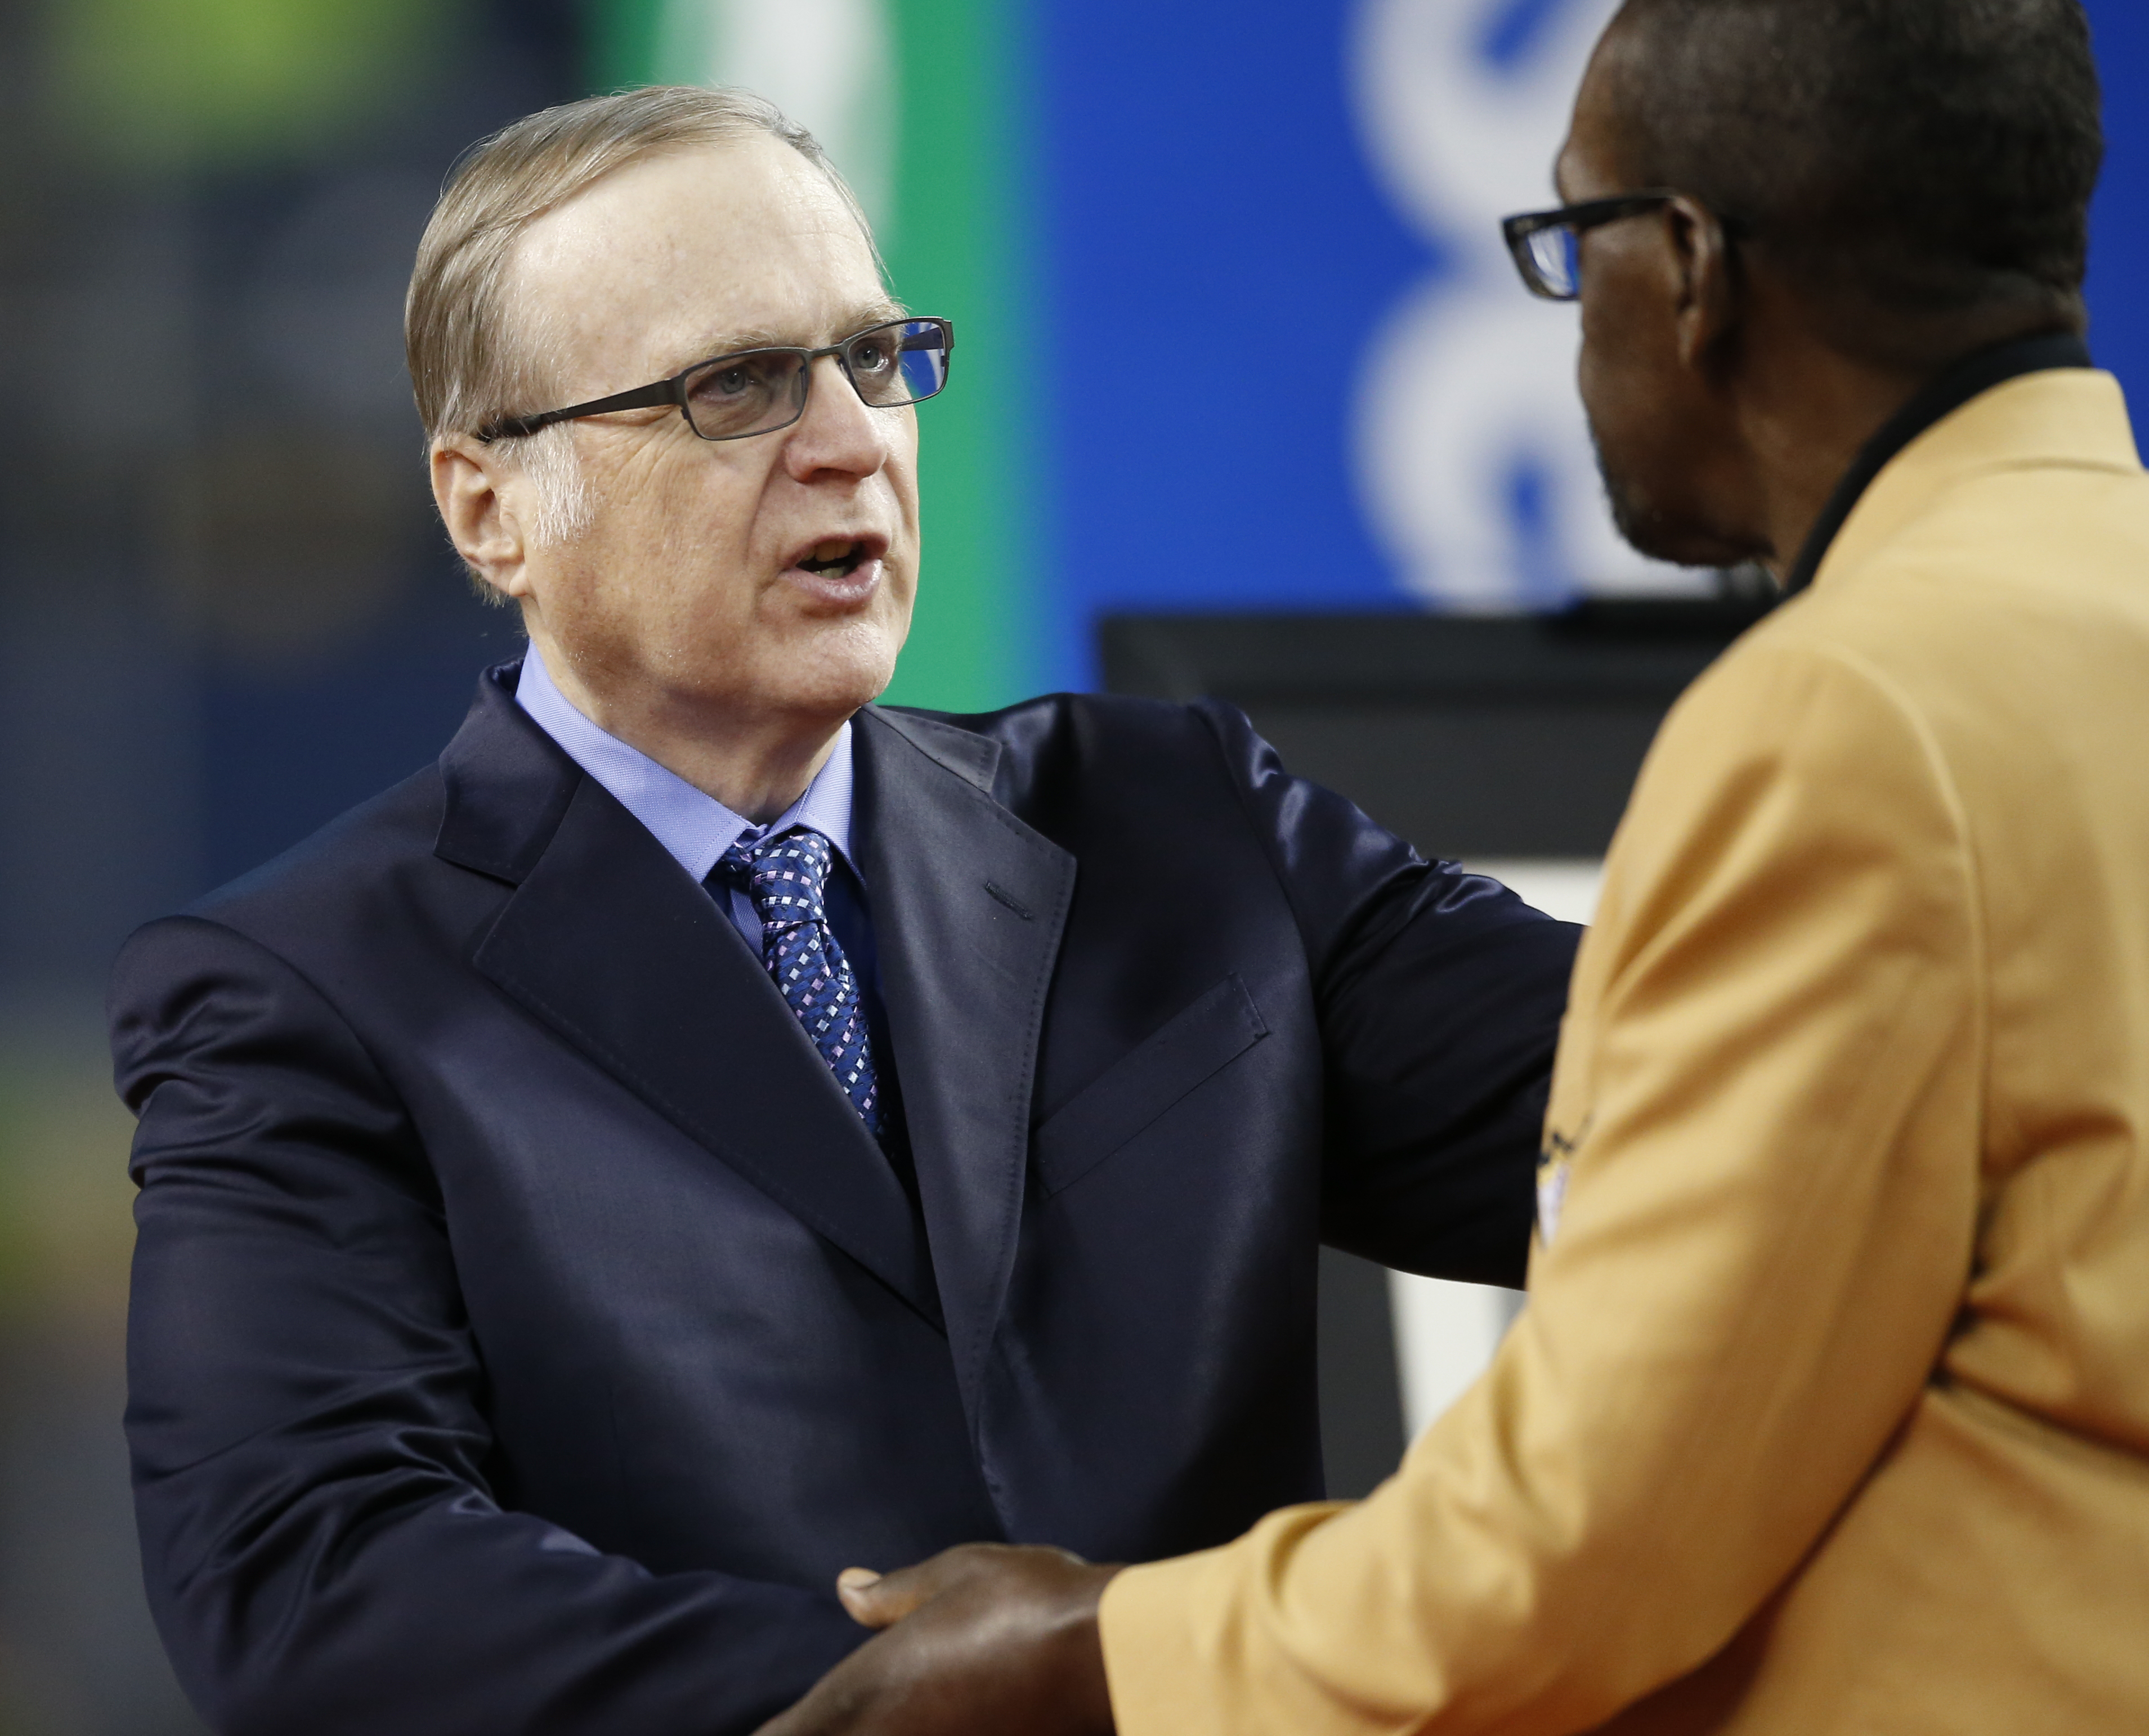 Late Seahawks owner Paul Allen greets an NFL Hall of Fame member in 2017